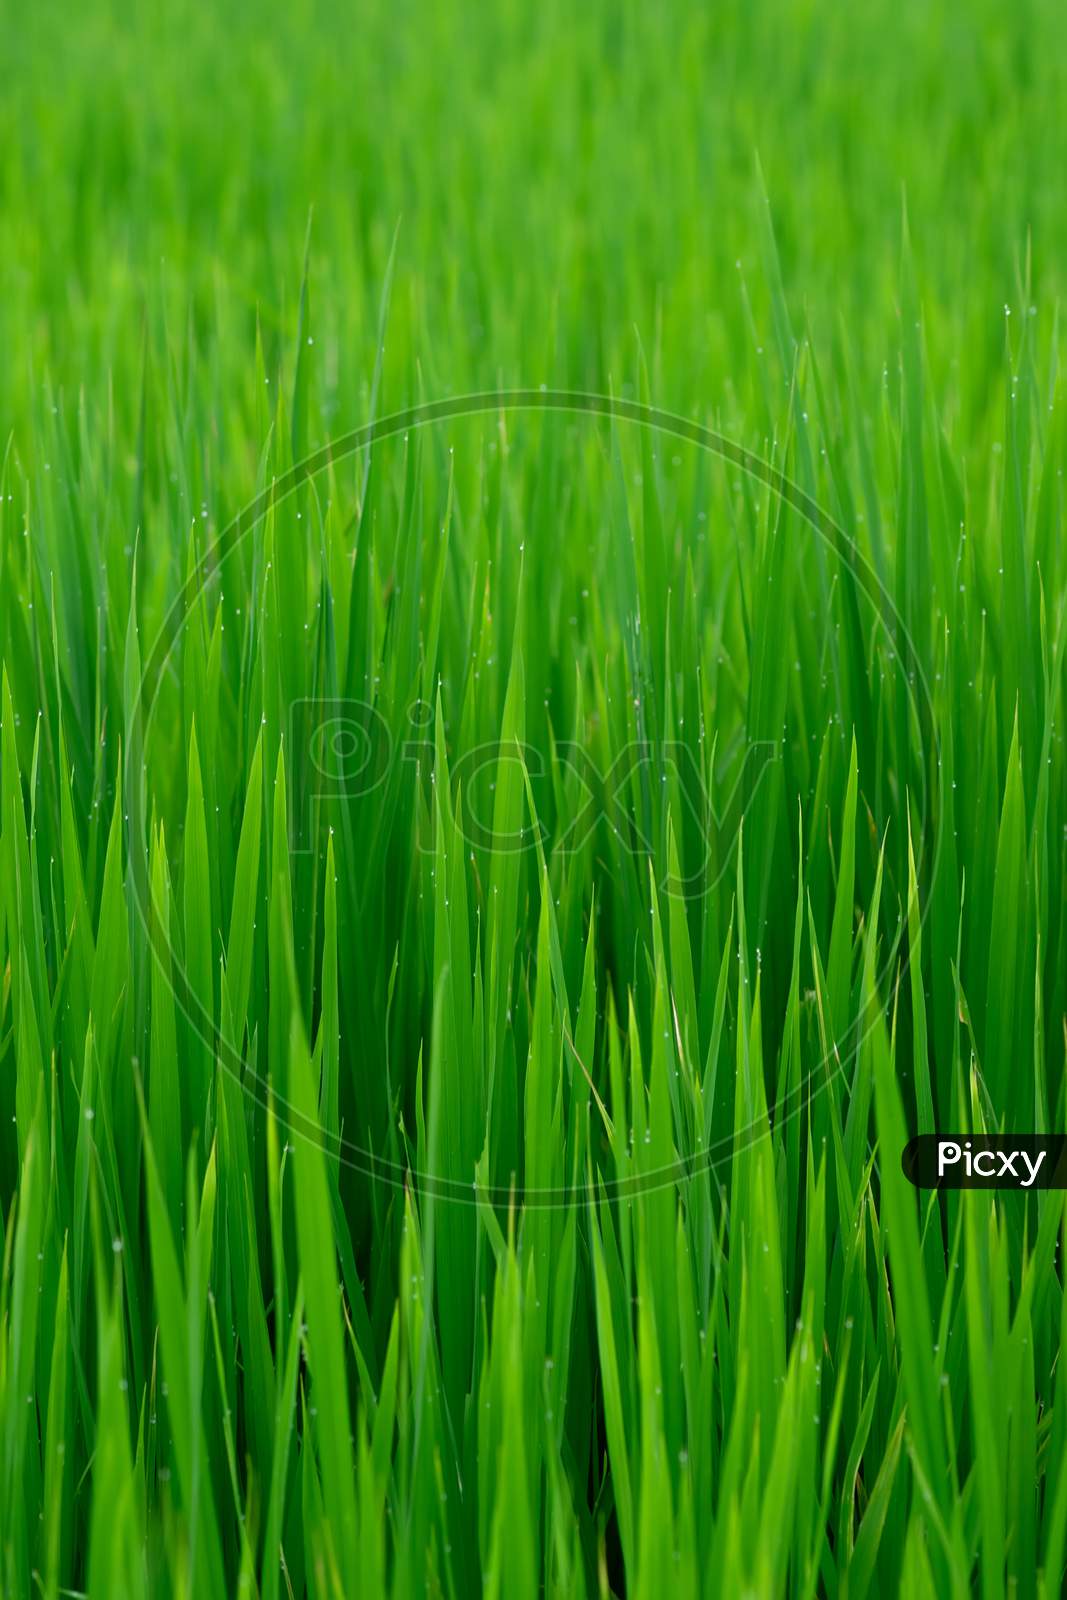 Paddy Also Known As Rice Crop Leaves In The Farm. Used Selective Focus.